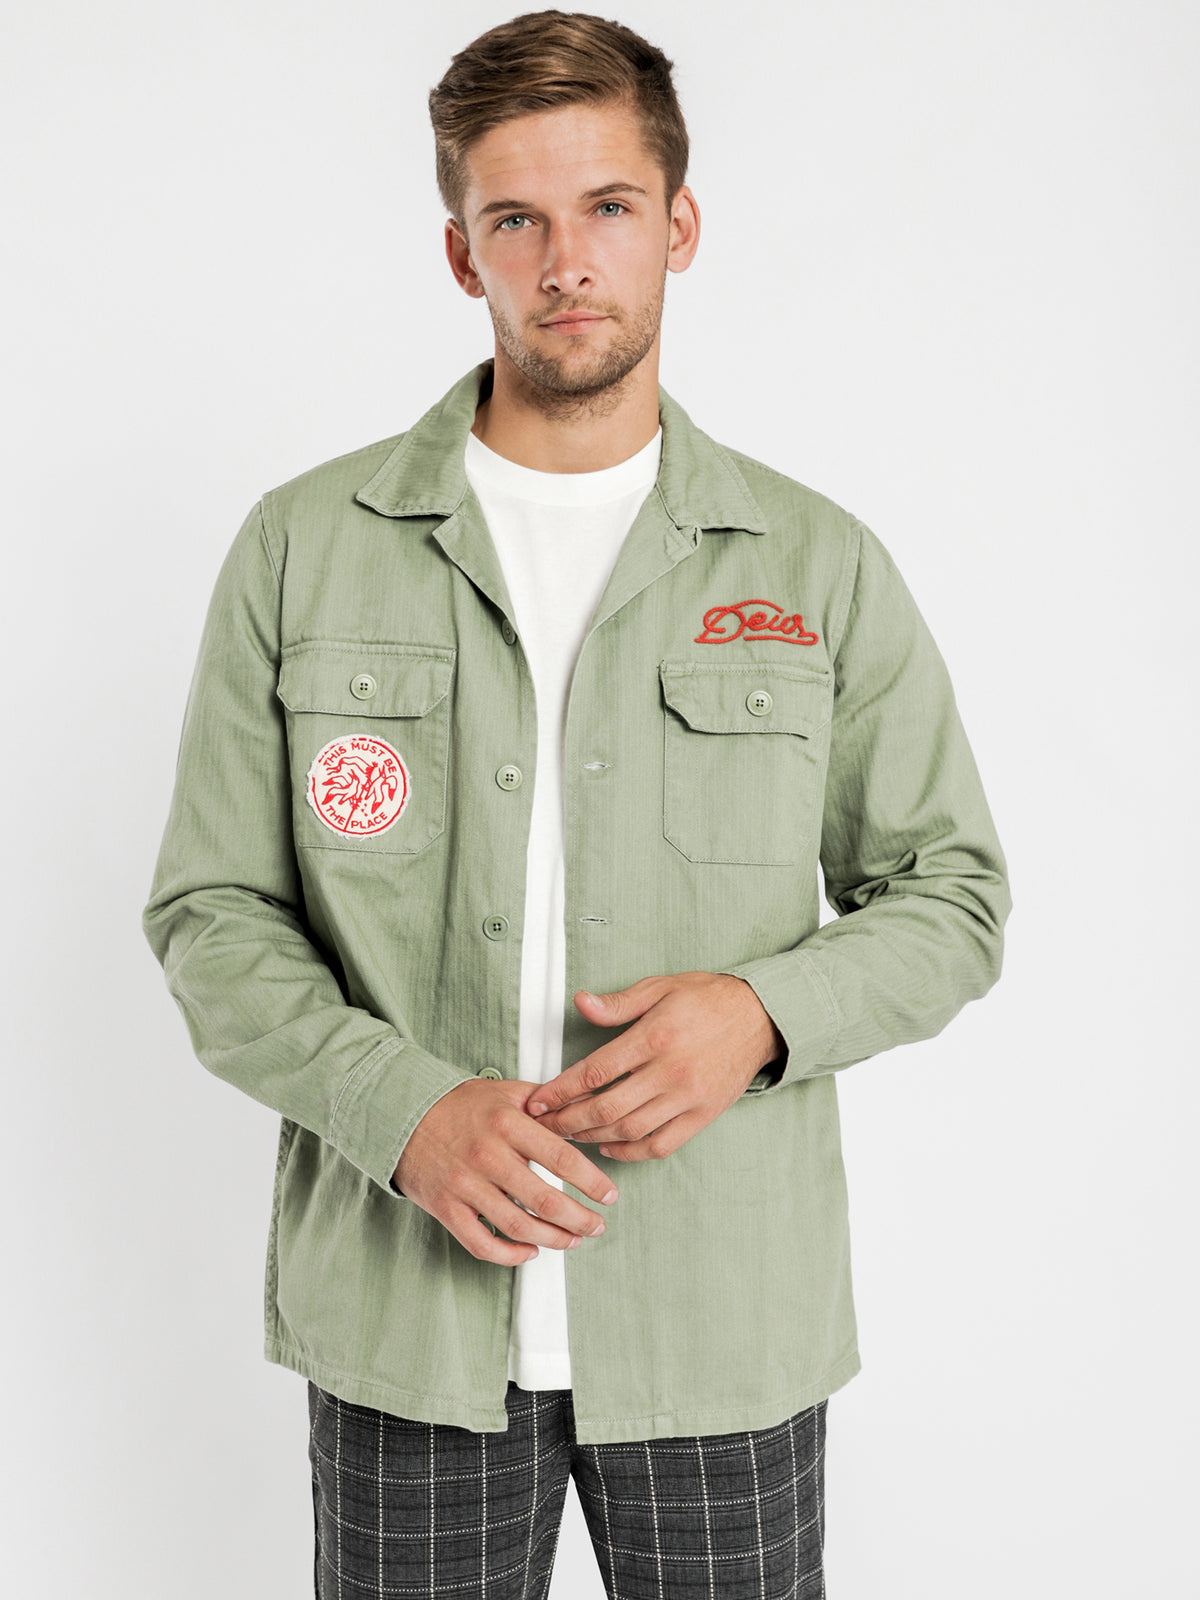 Sea Squalor Shirt in Army Green